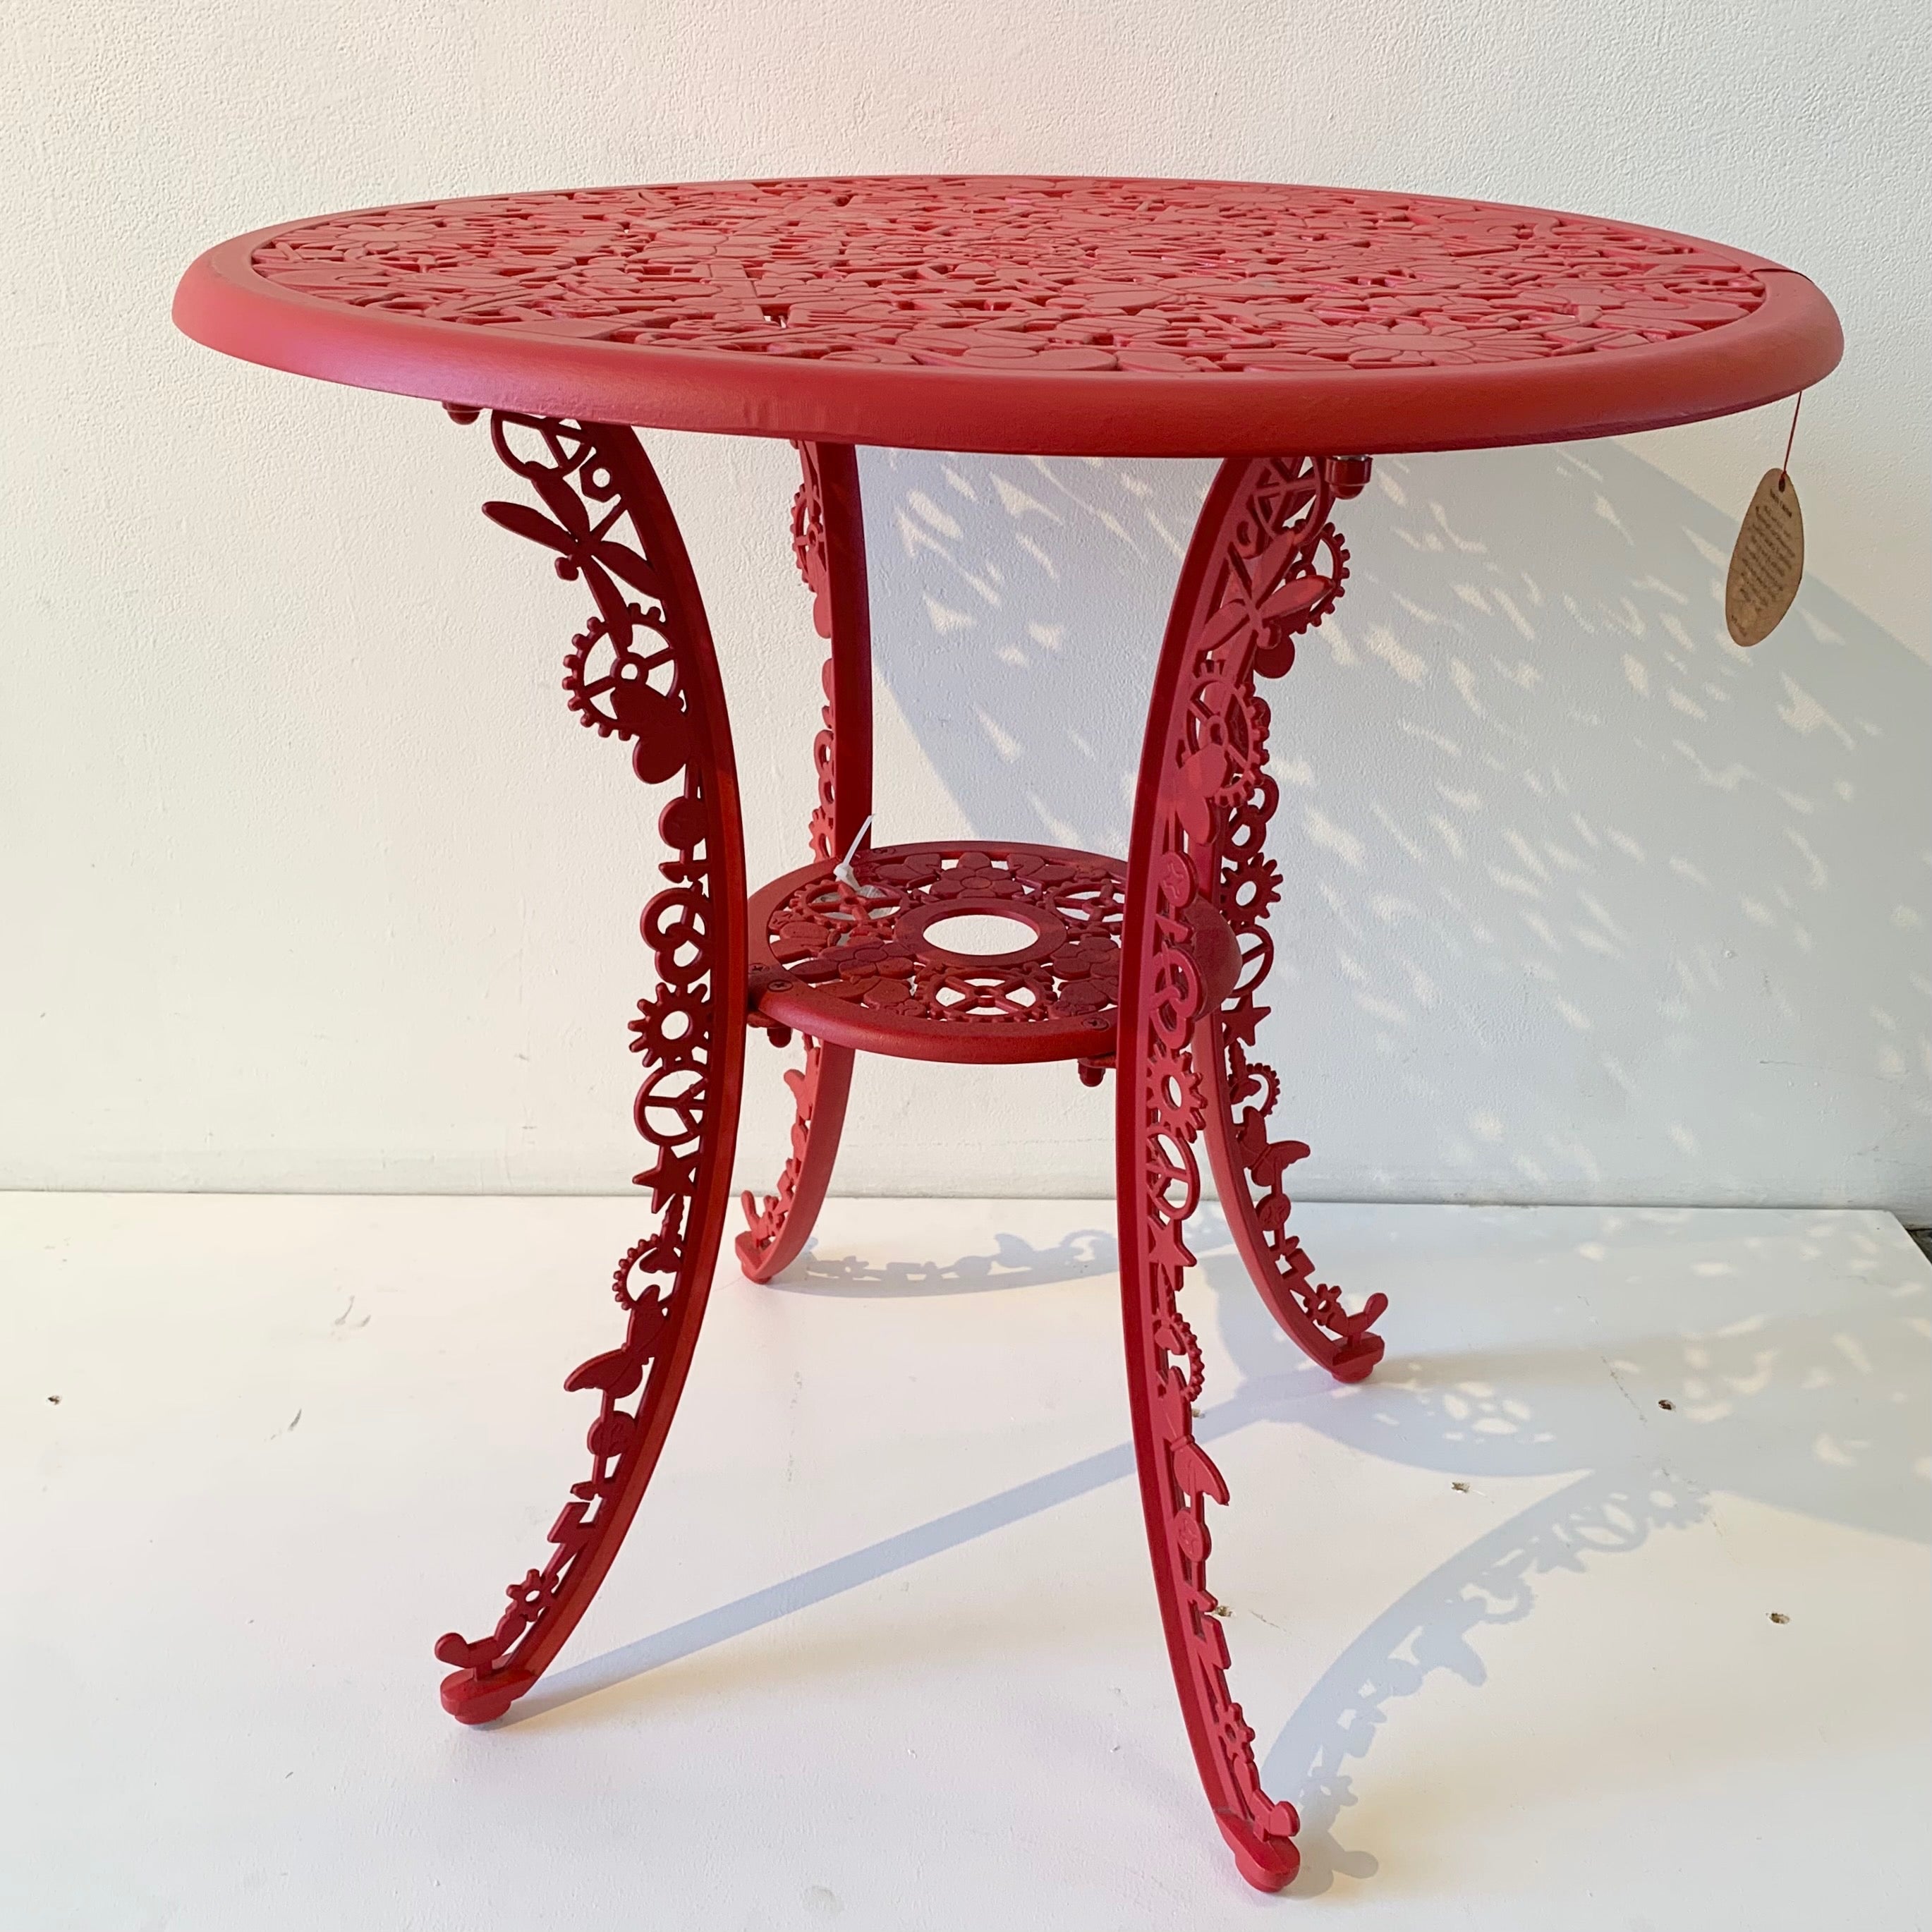 Painted Aluminum Table from Italy - Red